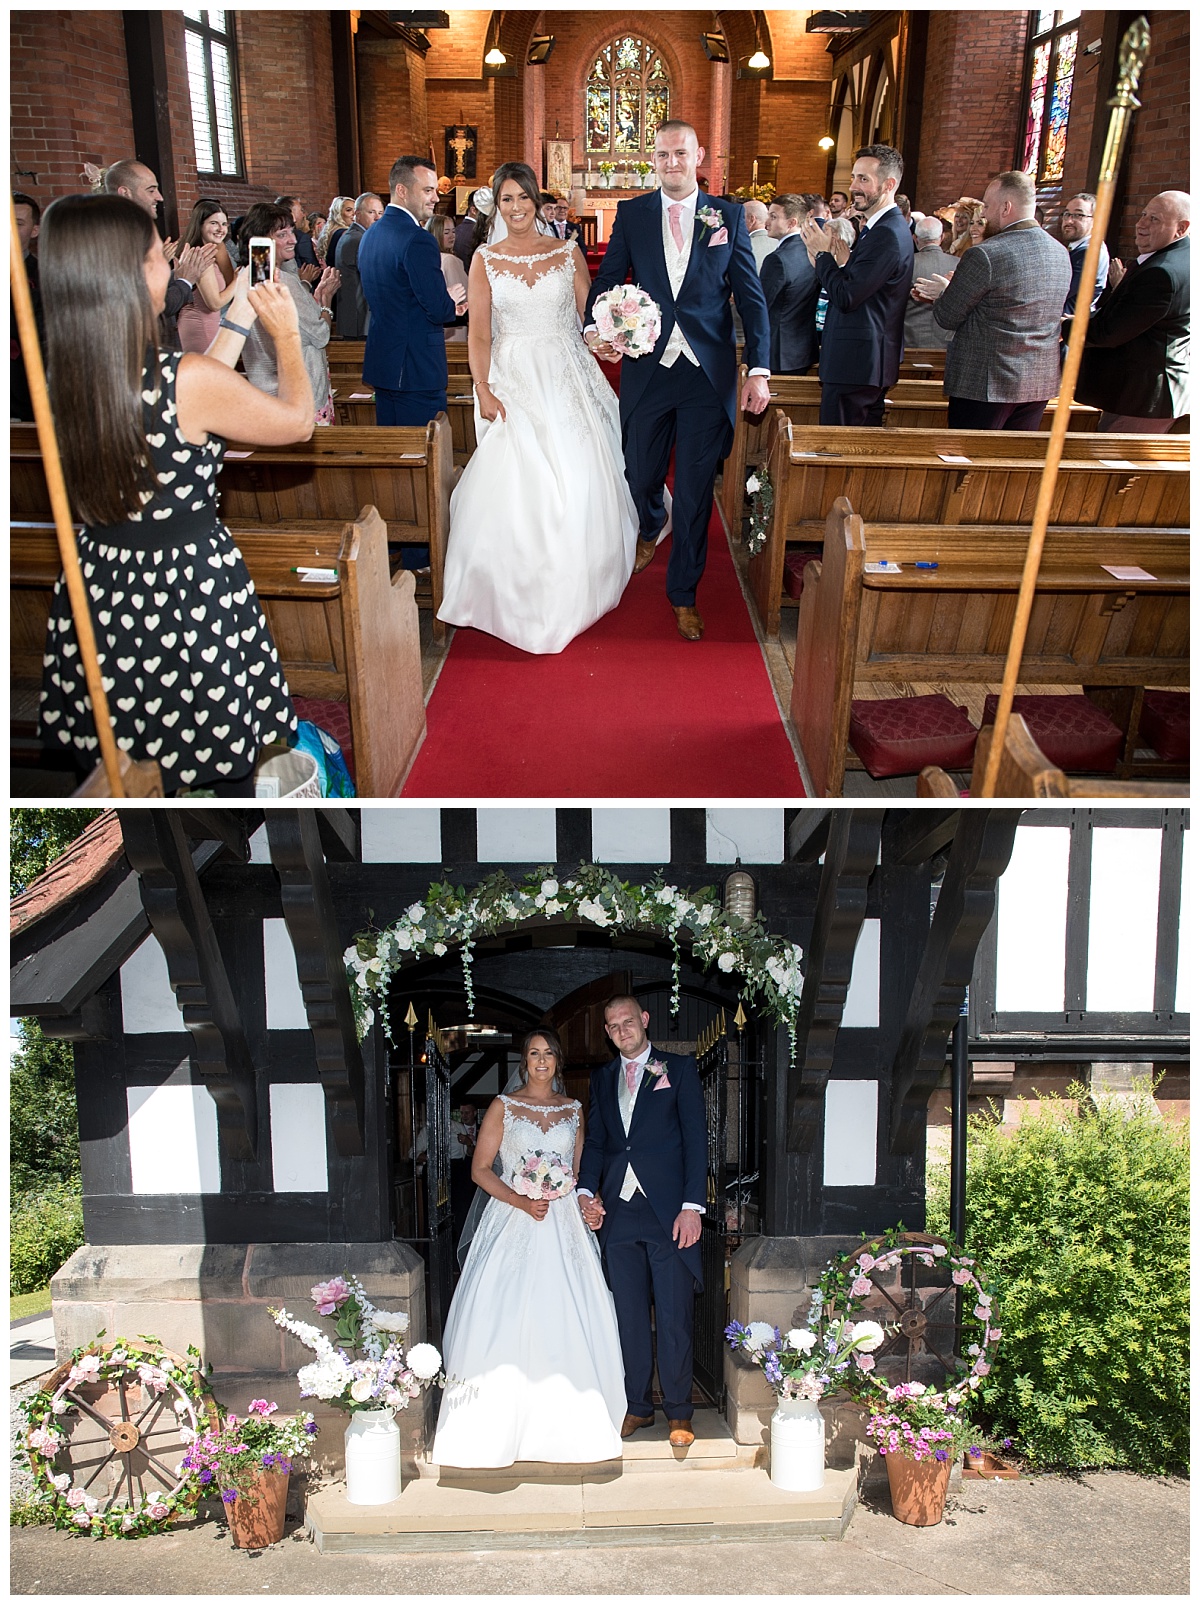 Wedding Photography Manchester - Melissa and Stuarts Mere Golf Resort And Spa Wedding Day 51